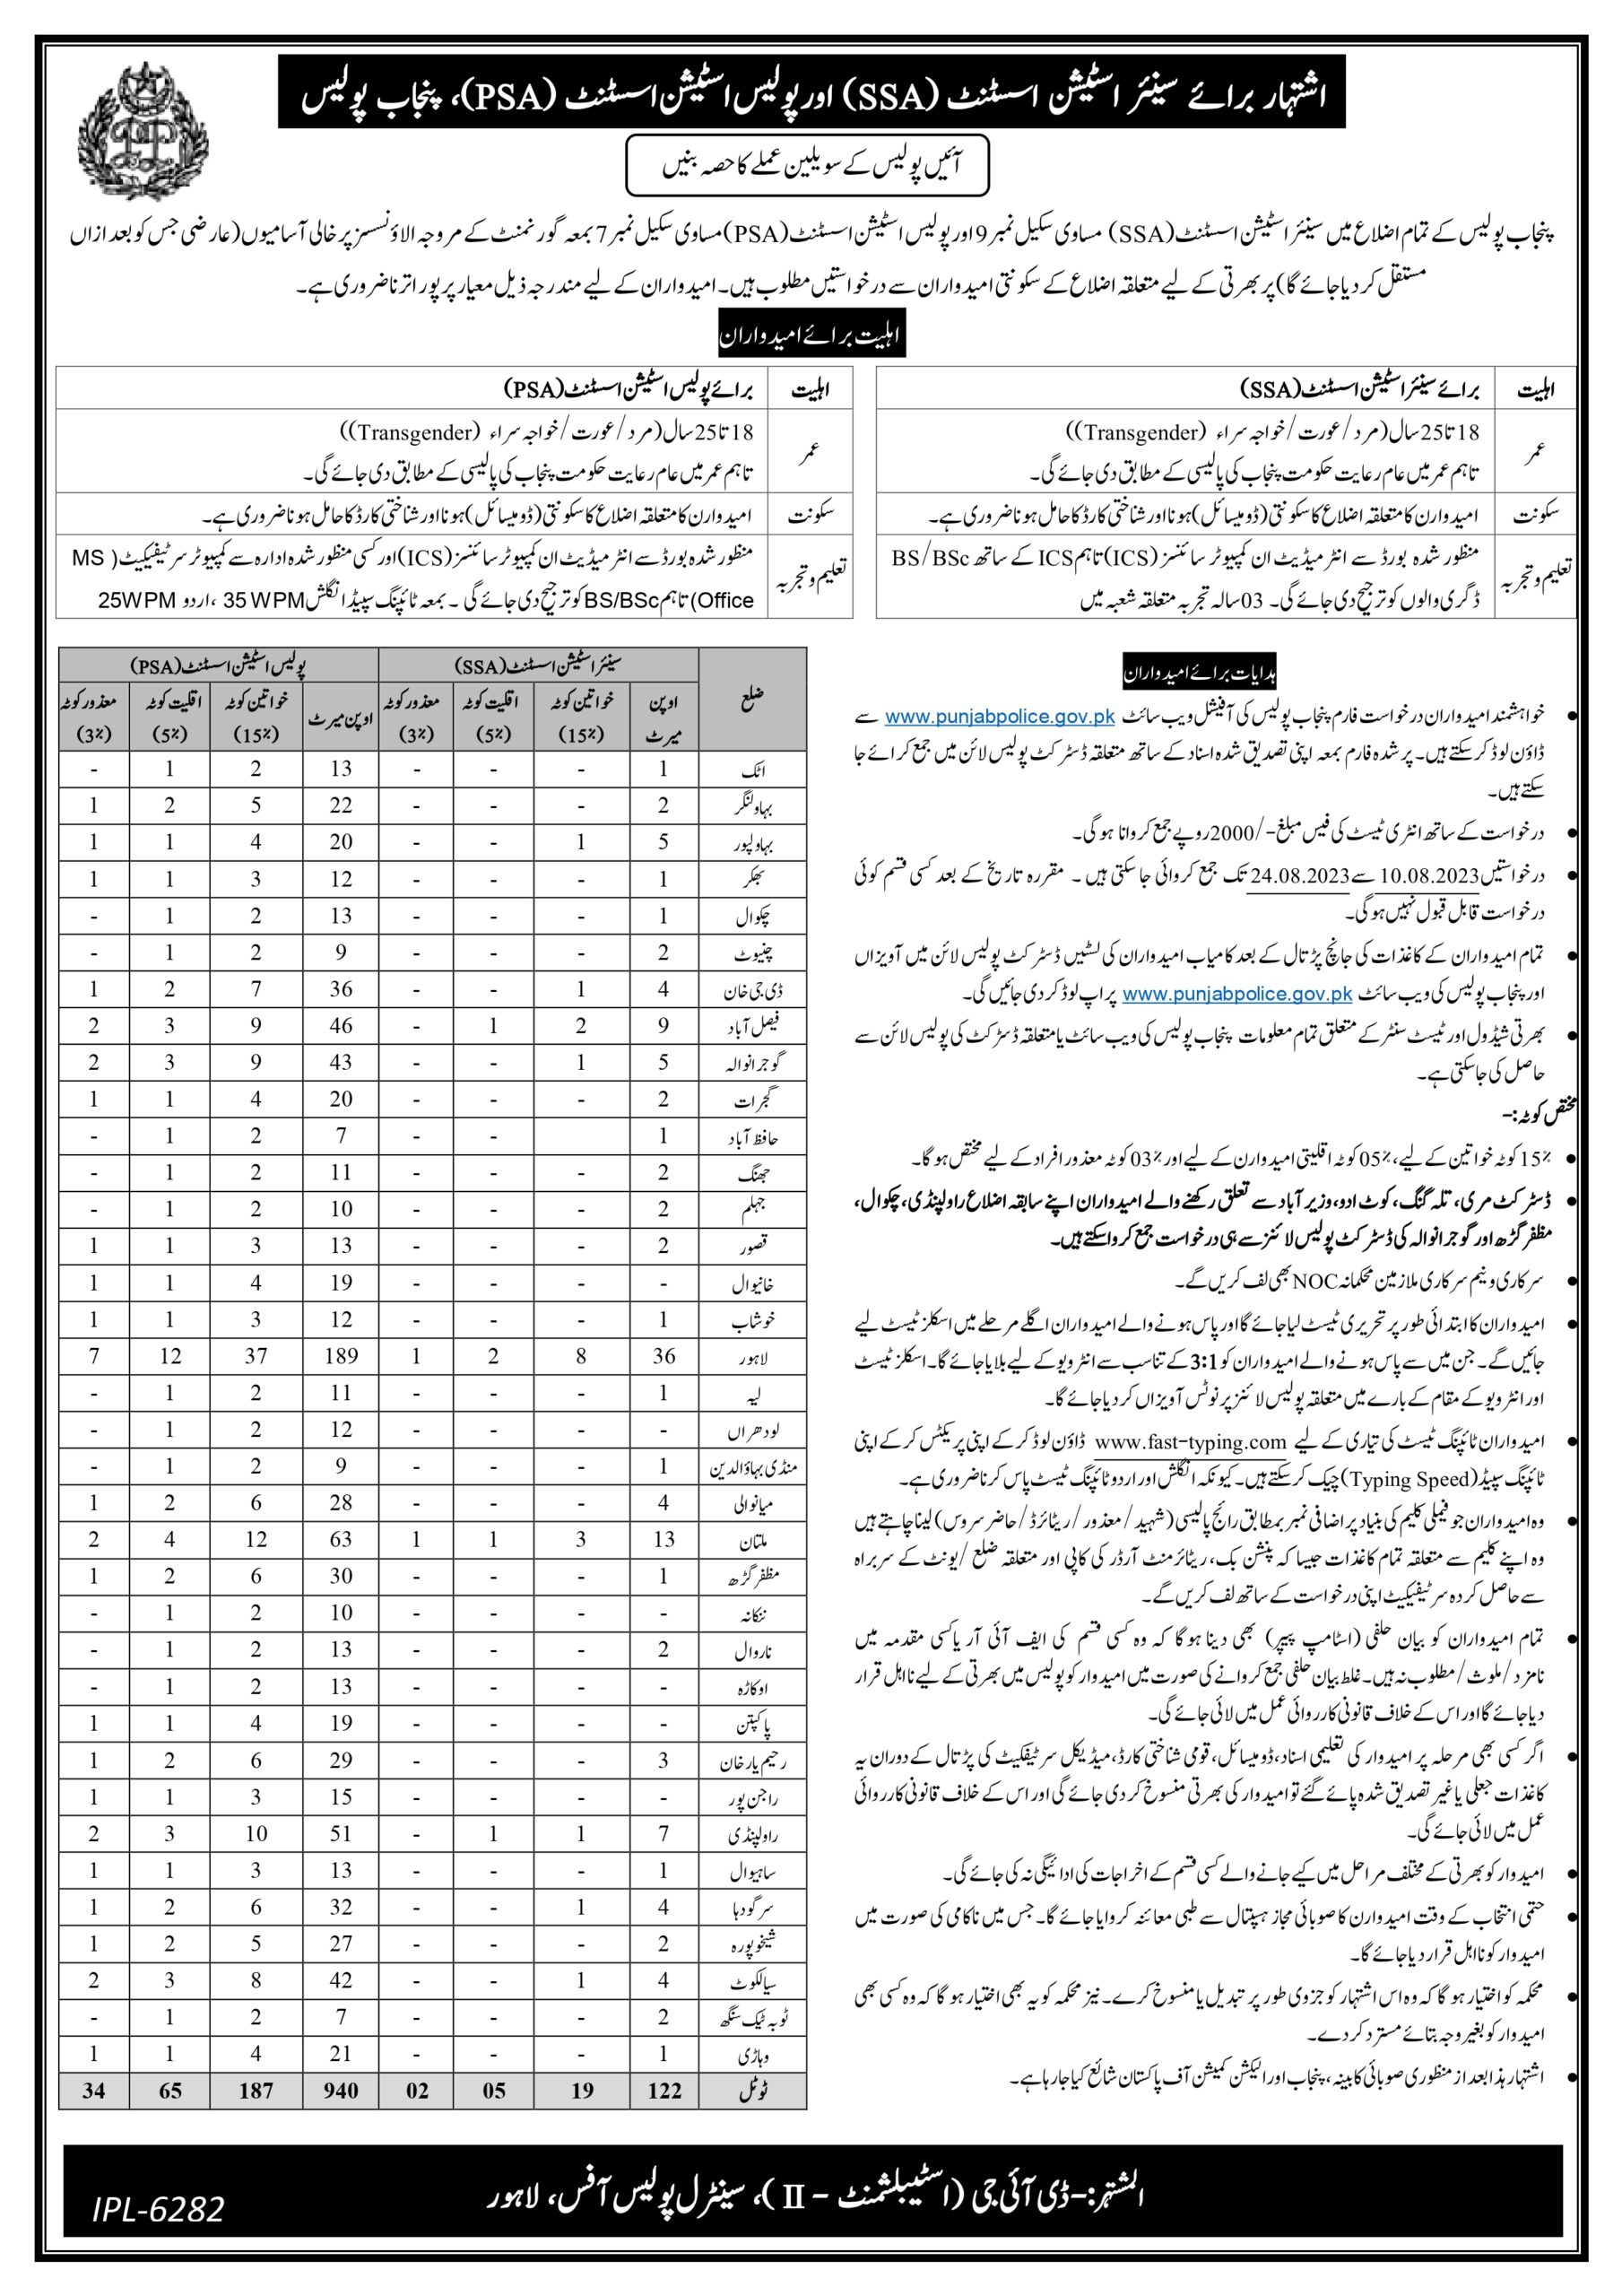 Punjab Police Hiring for SSA and PSA Across Punjab Males and Females